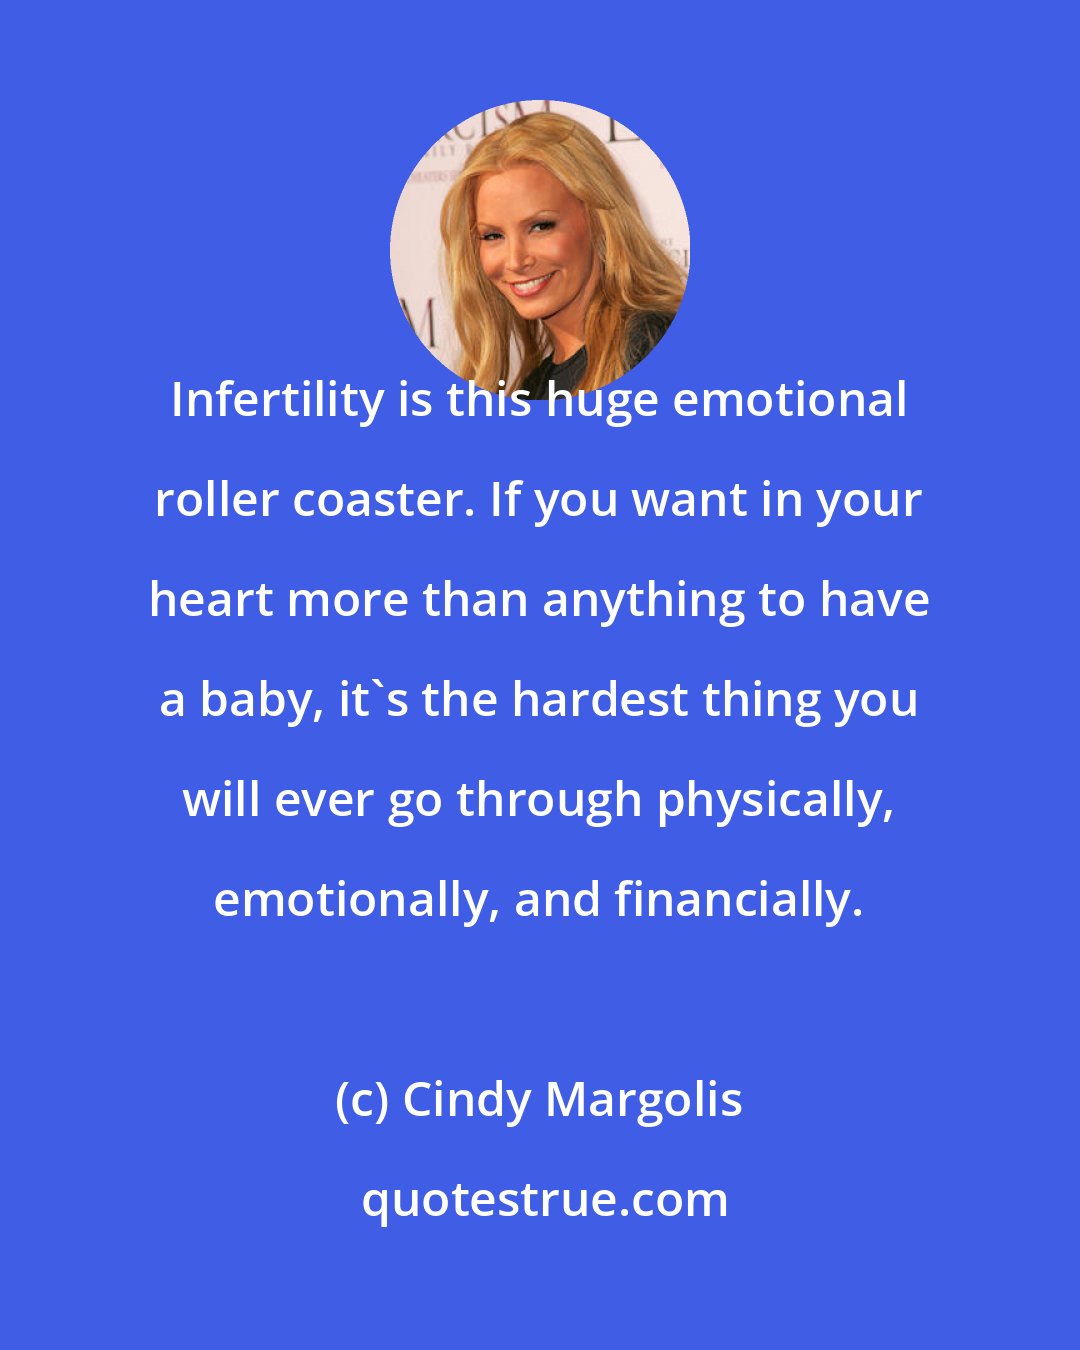 Cindy Margolis: Infertility is this huge emotional roller coaster. If you want in your heart more than anything to have a baby, it's the hardest thing you will ever go through physically, emotionally, and financially.